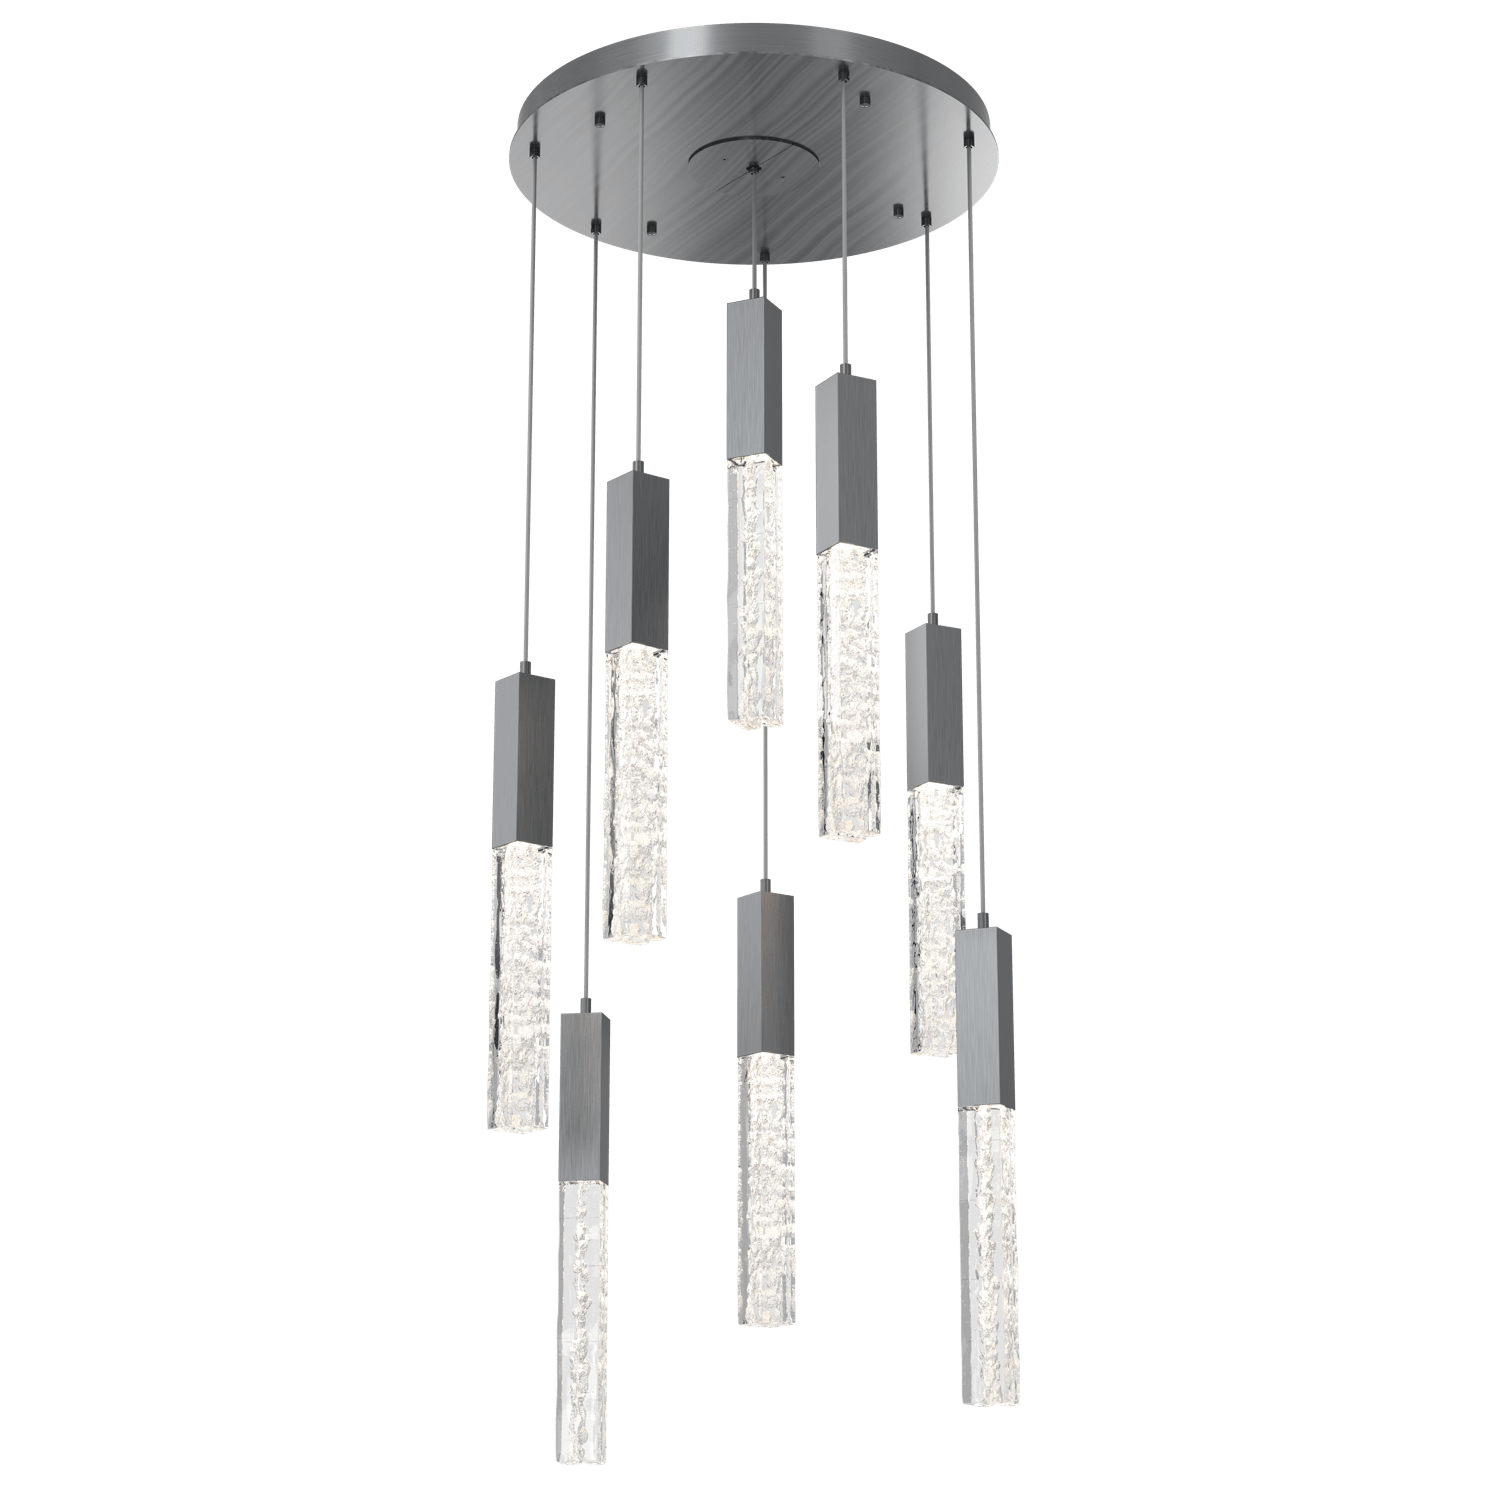 CHB0060-08-GM-GC-Hammerton-Studio-Axis-8-Light-Pendant-Chandelier-with-Gunmetal-finish-and-clear-cast-glass-and-LED-lamping